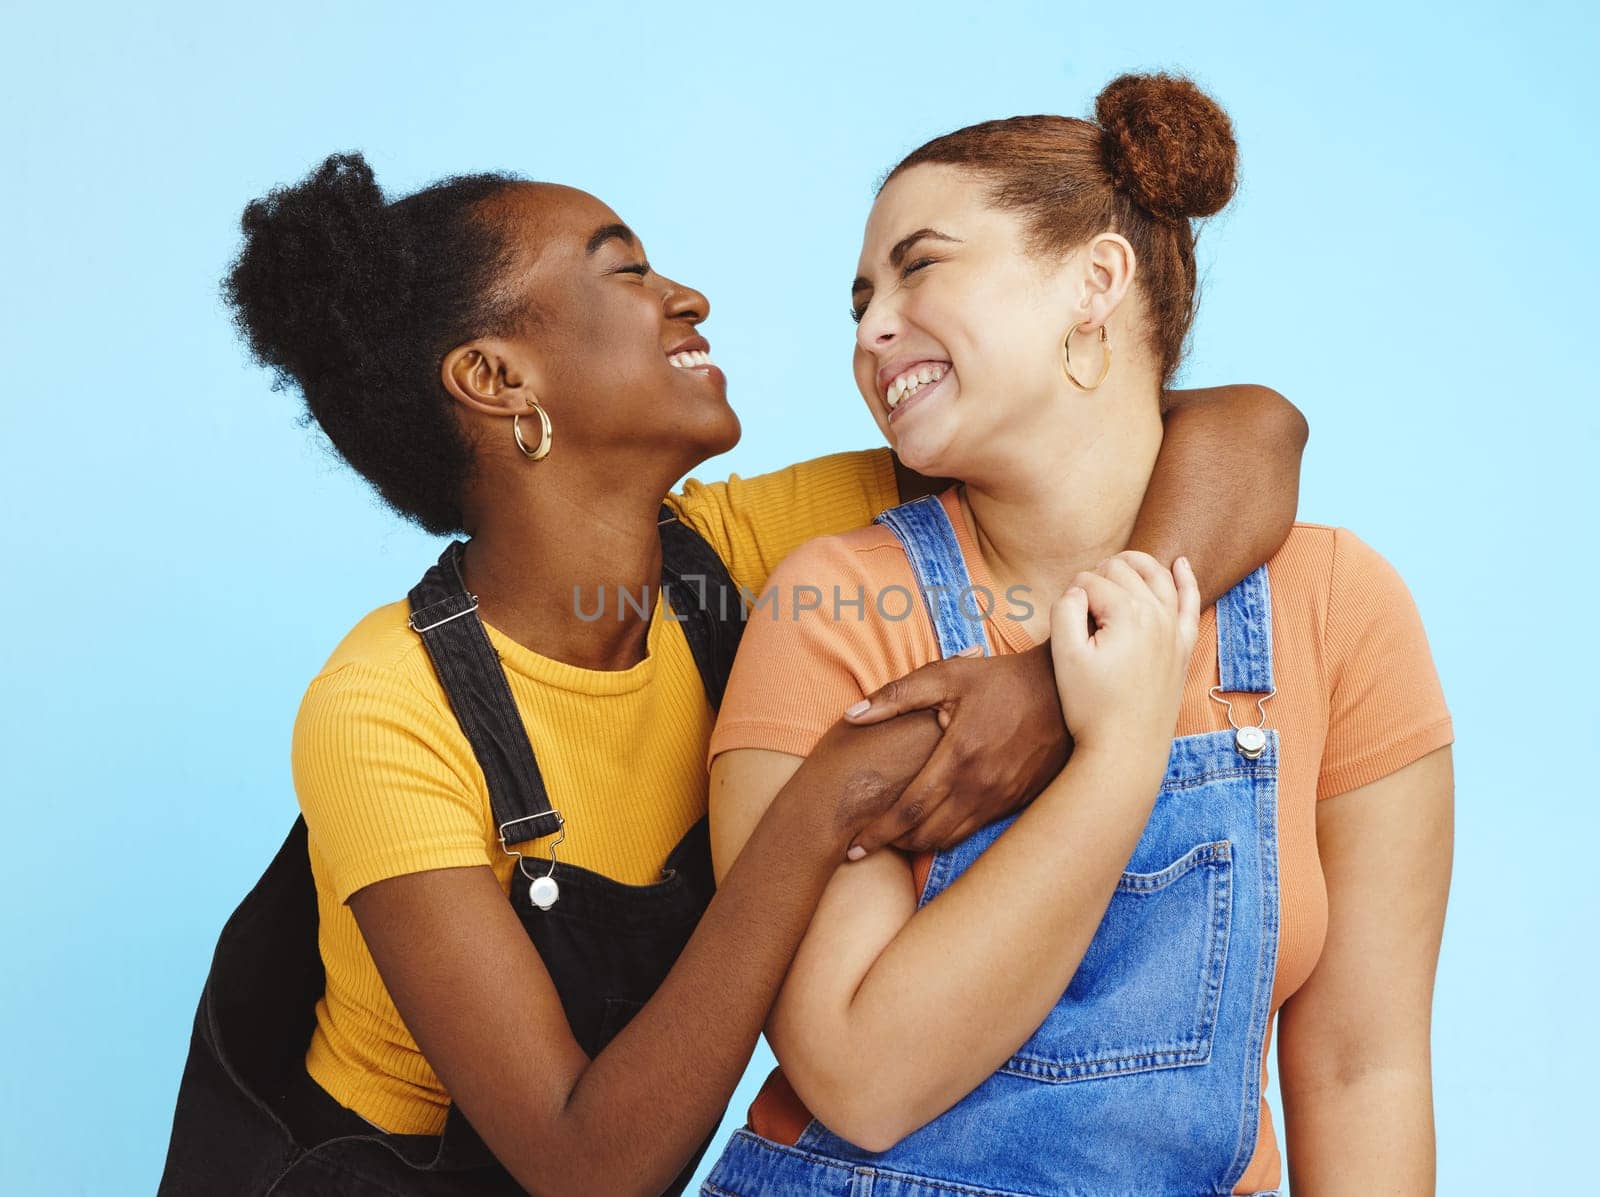 Hug, lesbian women and couple with happiness, young and gen z with lgbt, fashion and marketing with love against studio background. Happy lgbtq community, fun and freedom with style and pride by YuriArcurs